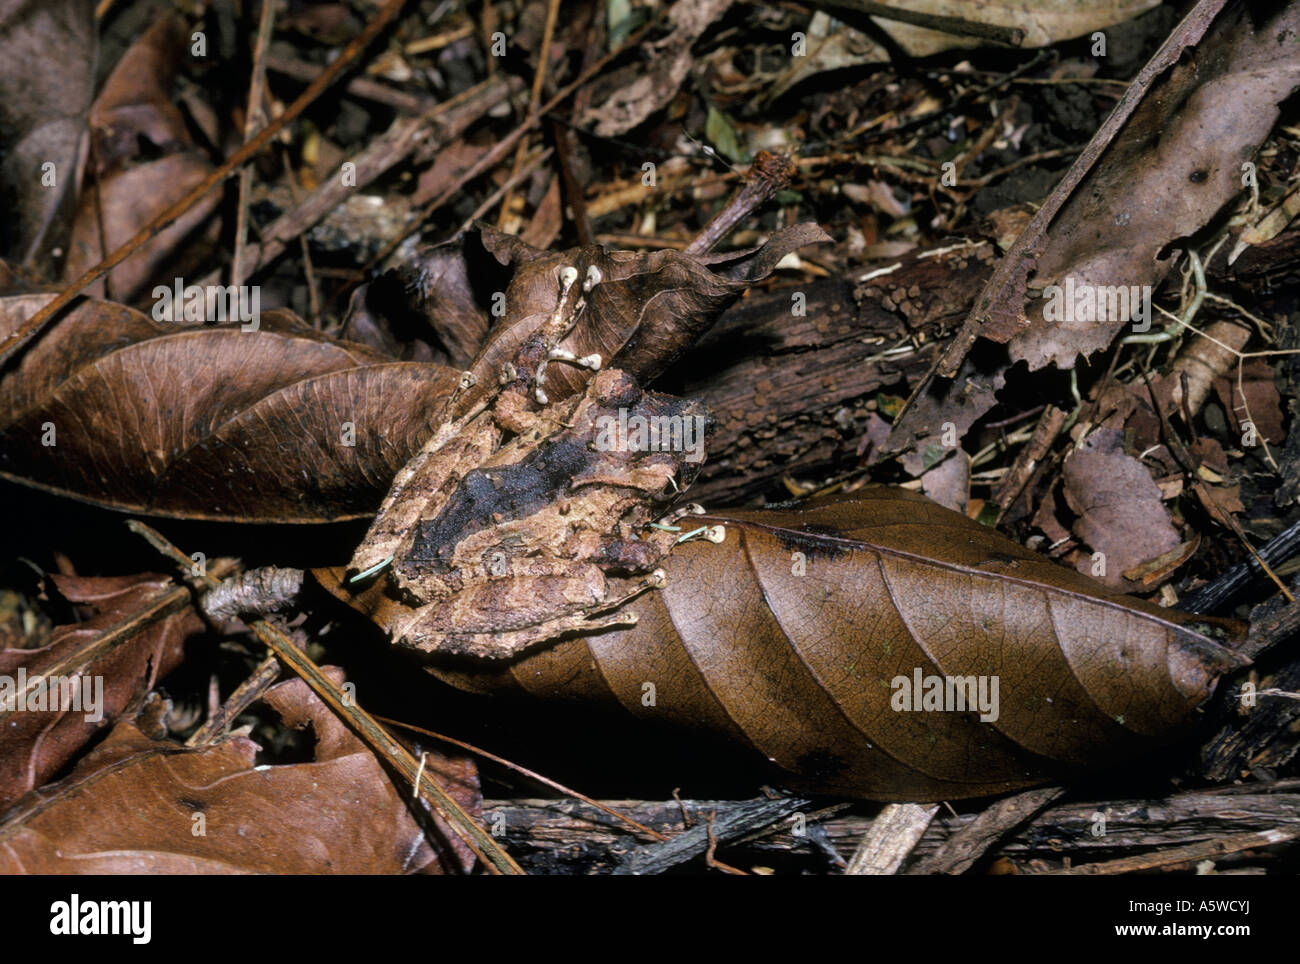 Noble s Robber frog Eleutherodactylus noblei Leptodactylidae mimicking a dead leaf in rainforest Costa Rica Stock Photo